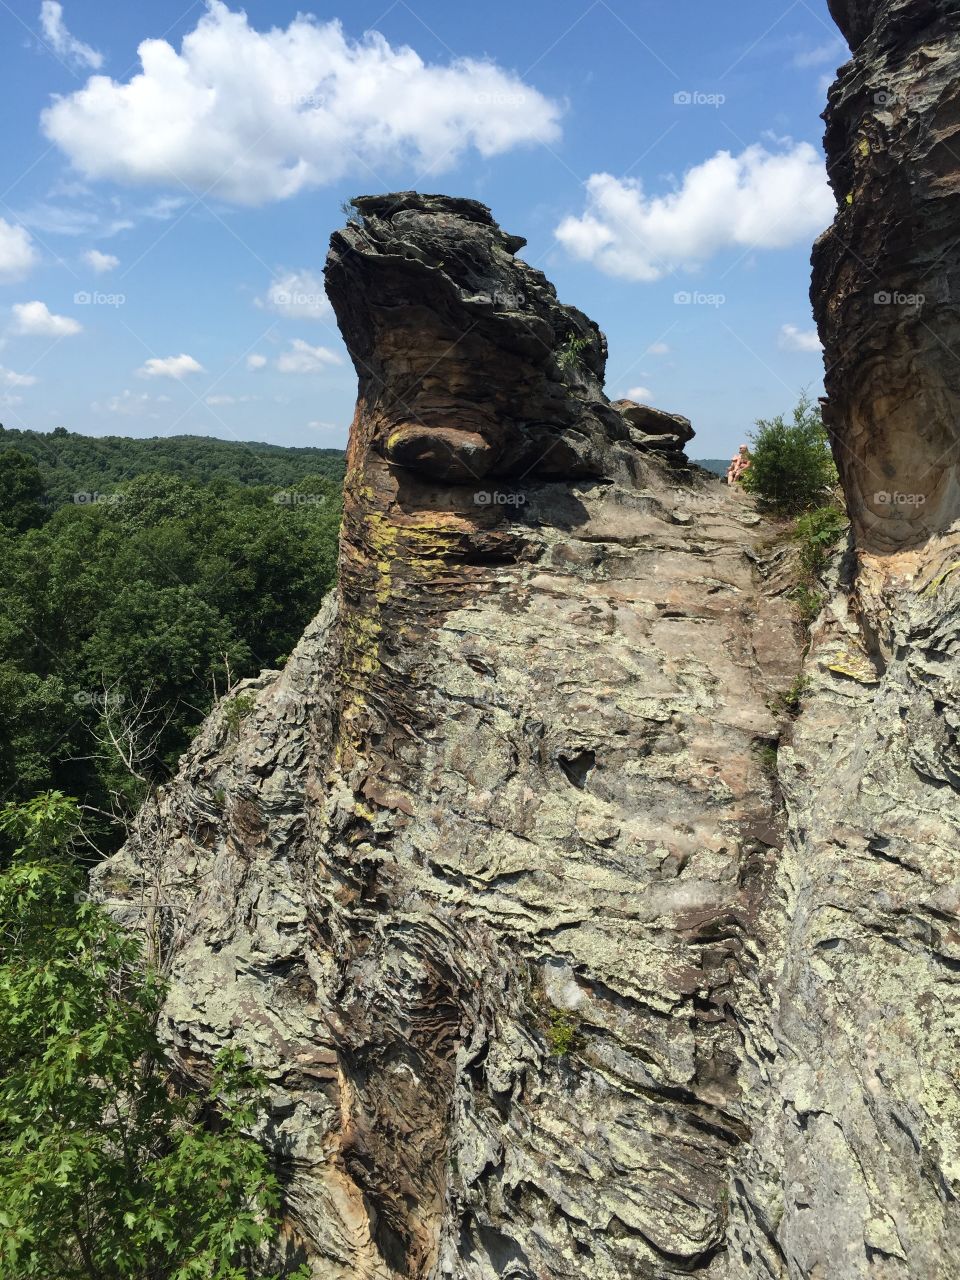 320 Million Year Old Rock Formations Shawnee National Forest In Southern Illinois